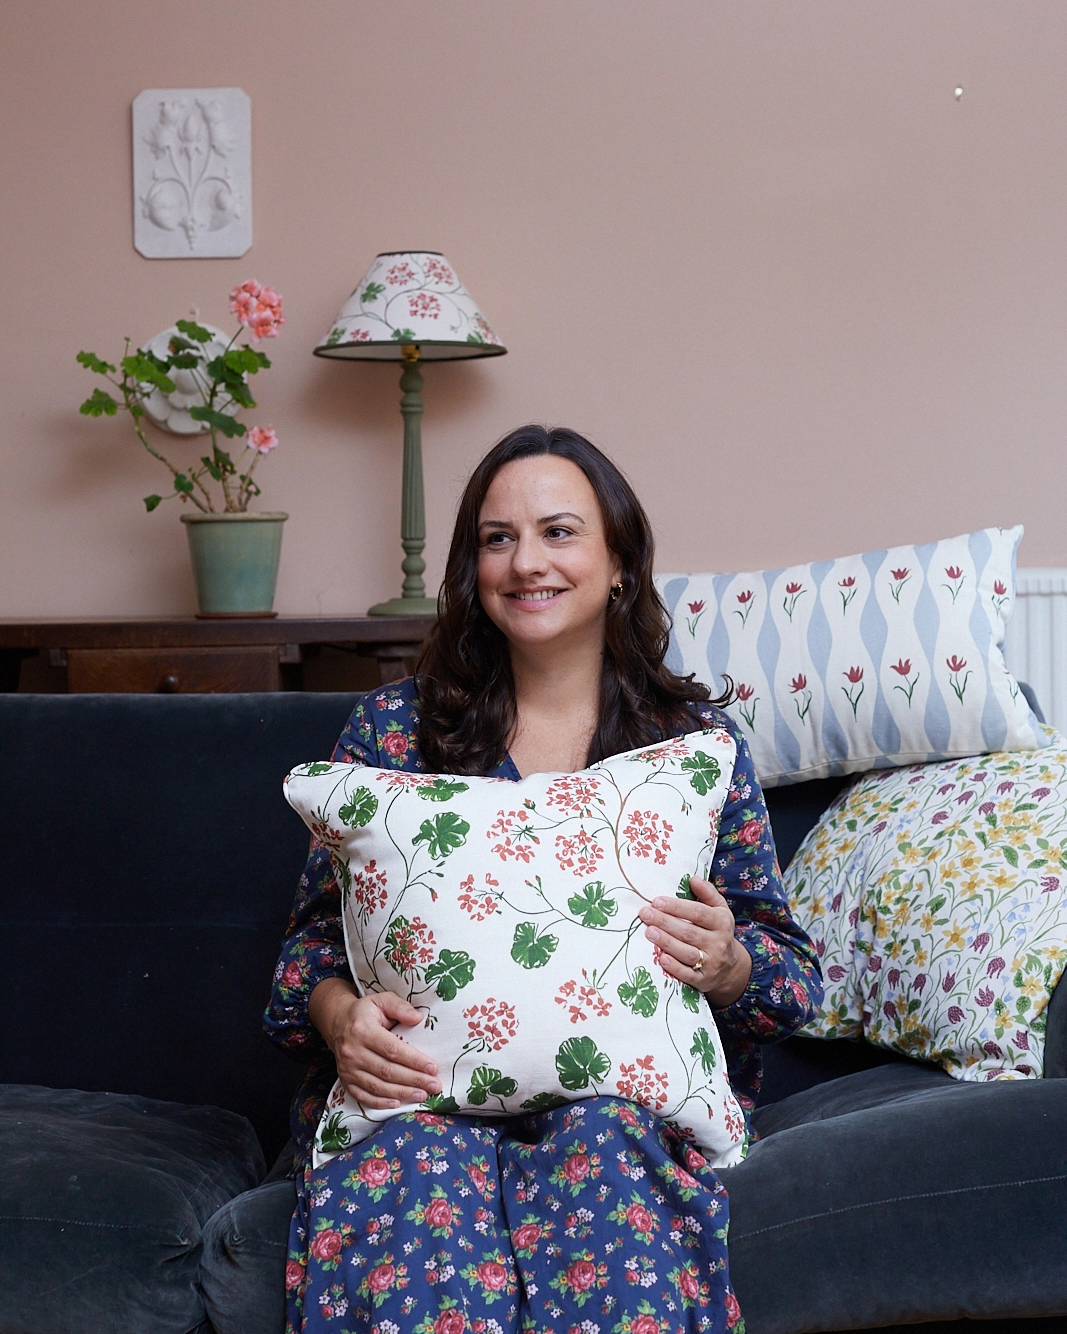 Artist and designer Sophie Harpley sitting on a sofa surrounded by her patterned cushions.